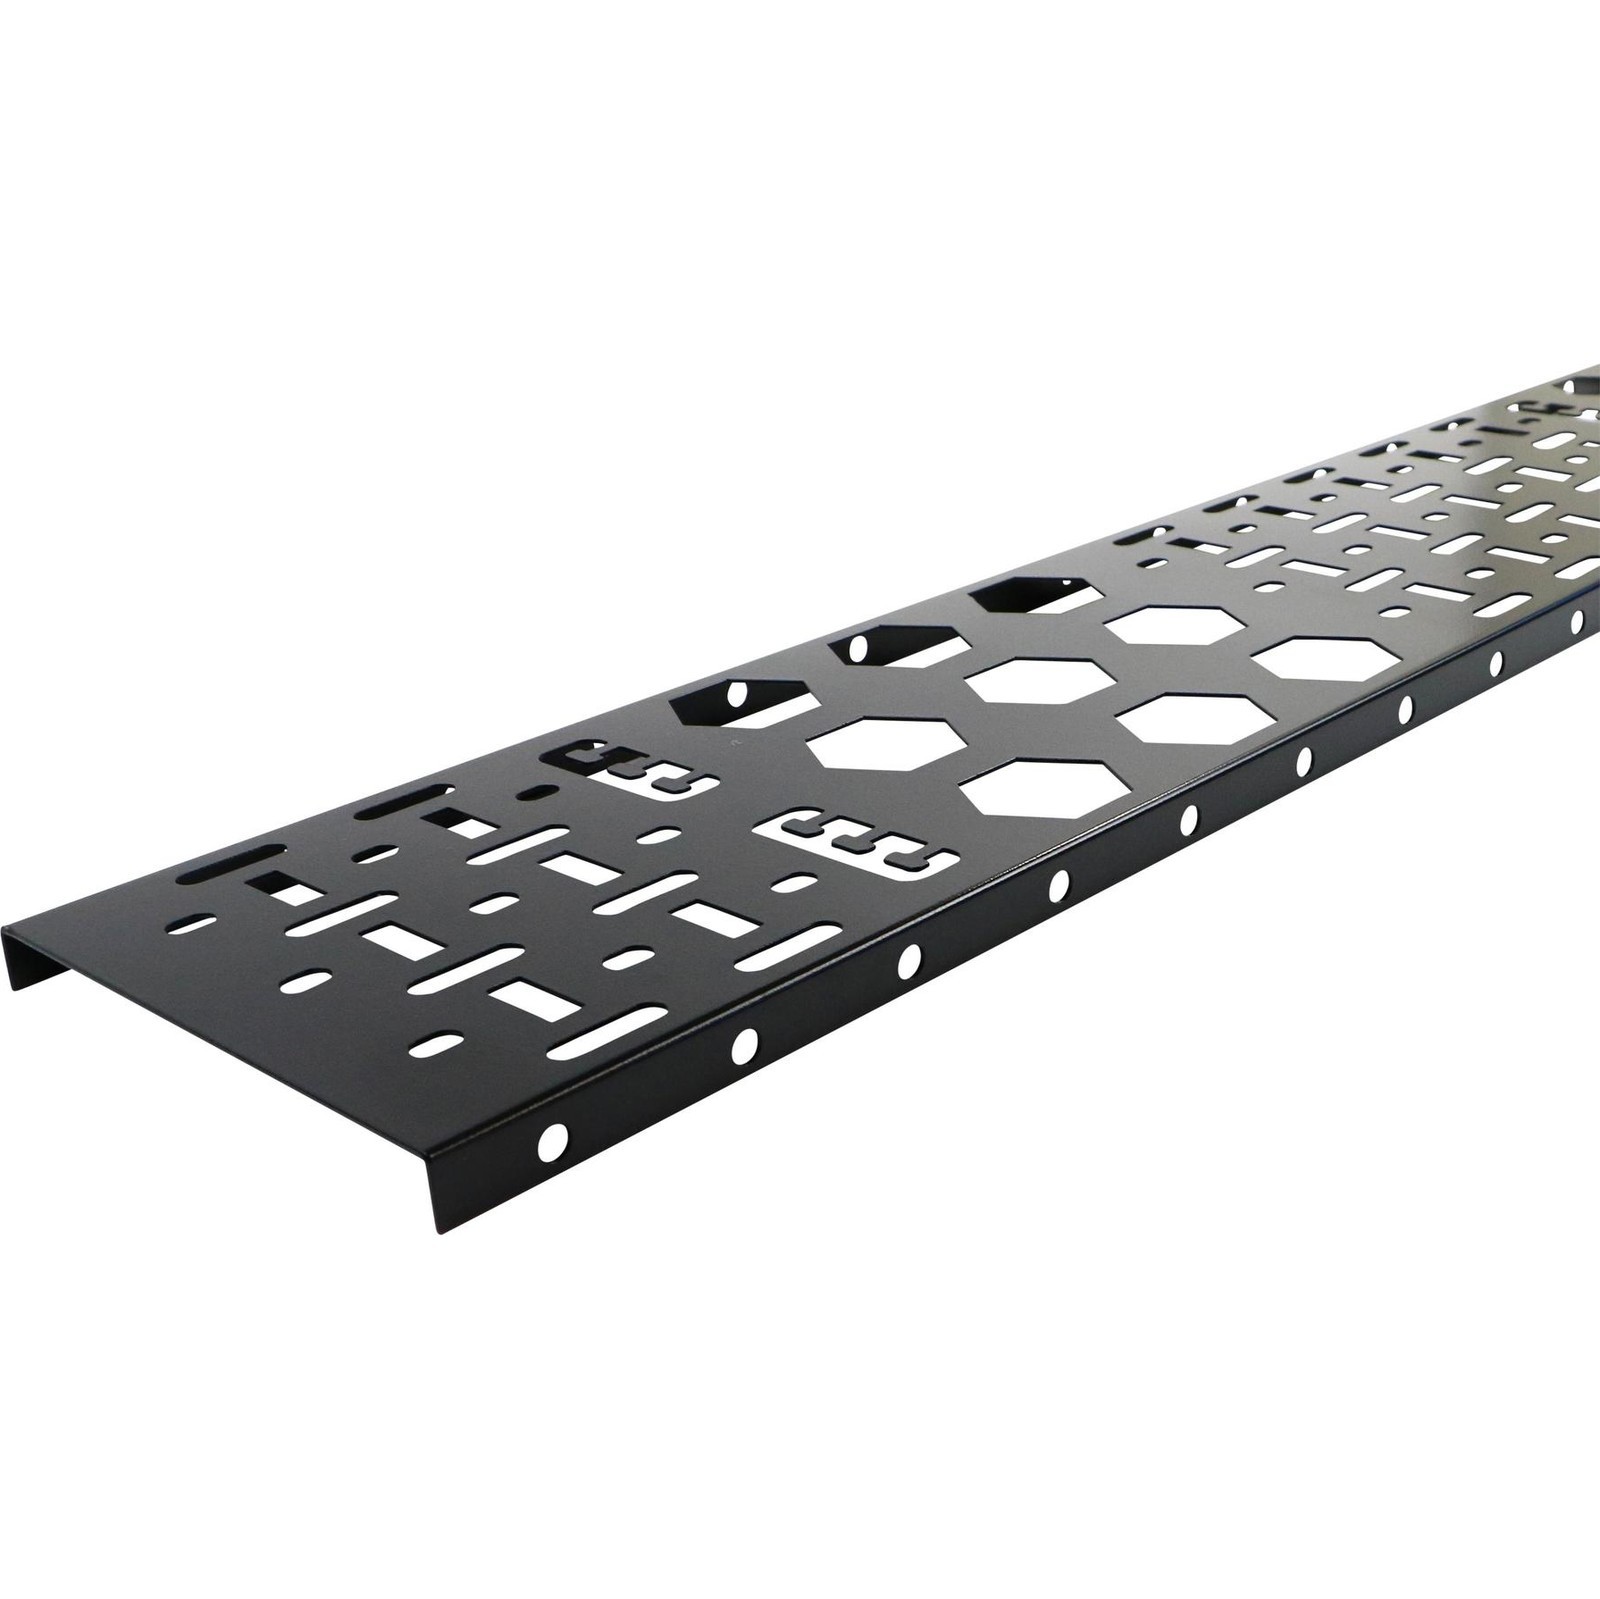  150mm 0U Black Cable Management Panel Multi Usage Enhanced Cable Tray 2pcs Manufactures